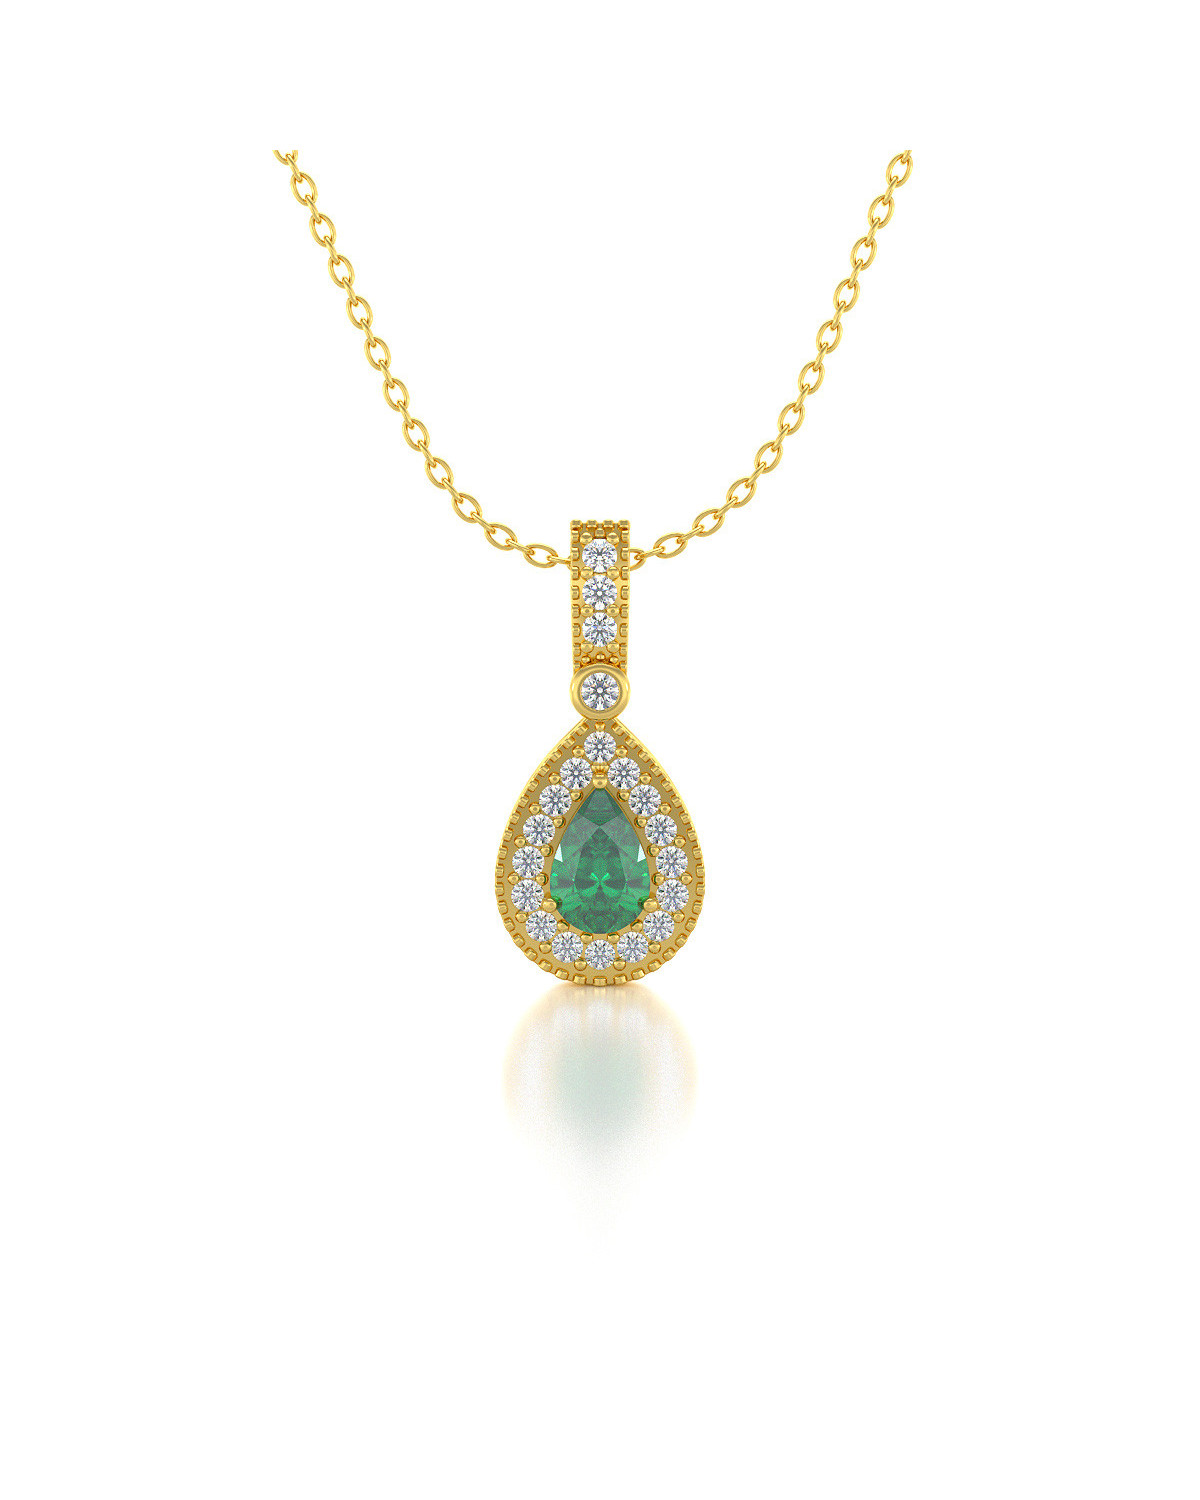 14K Gold Emerald Diamonds Necklace Pendant Gold Chain included